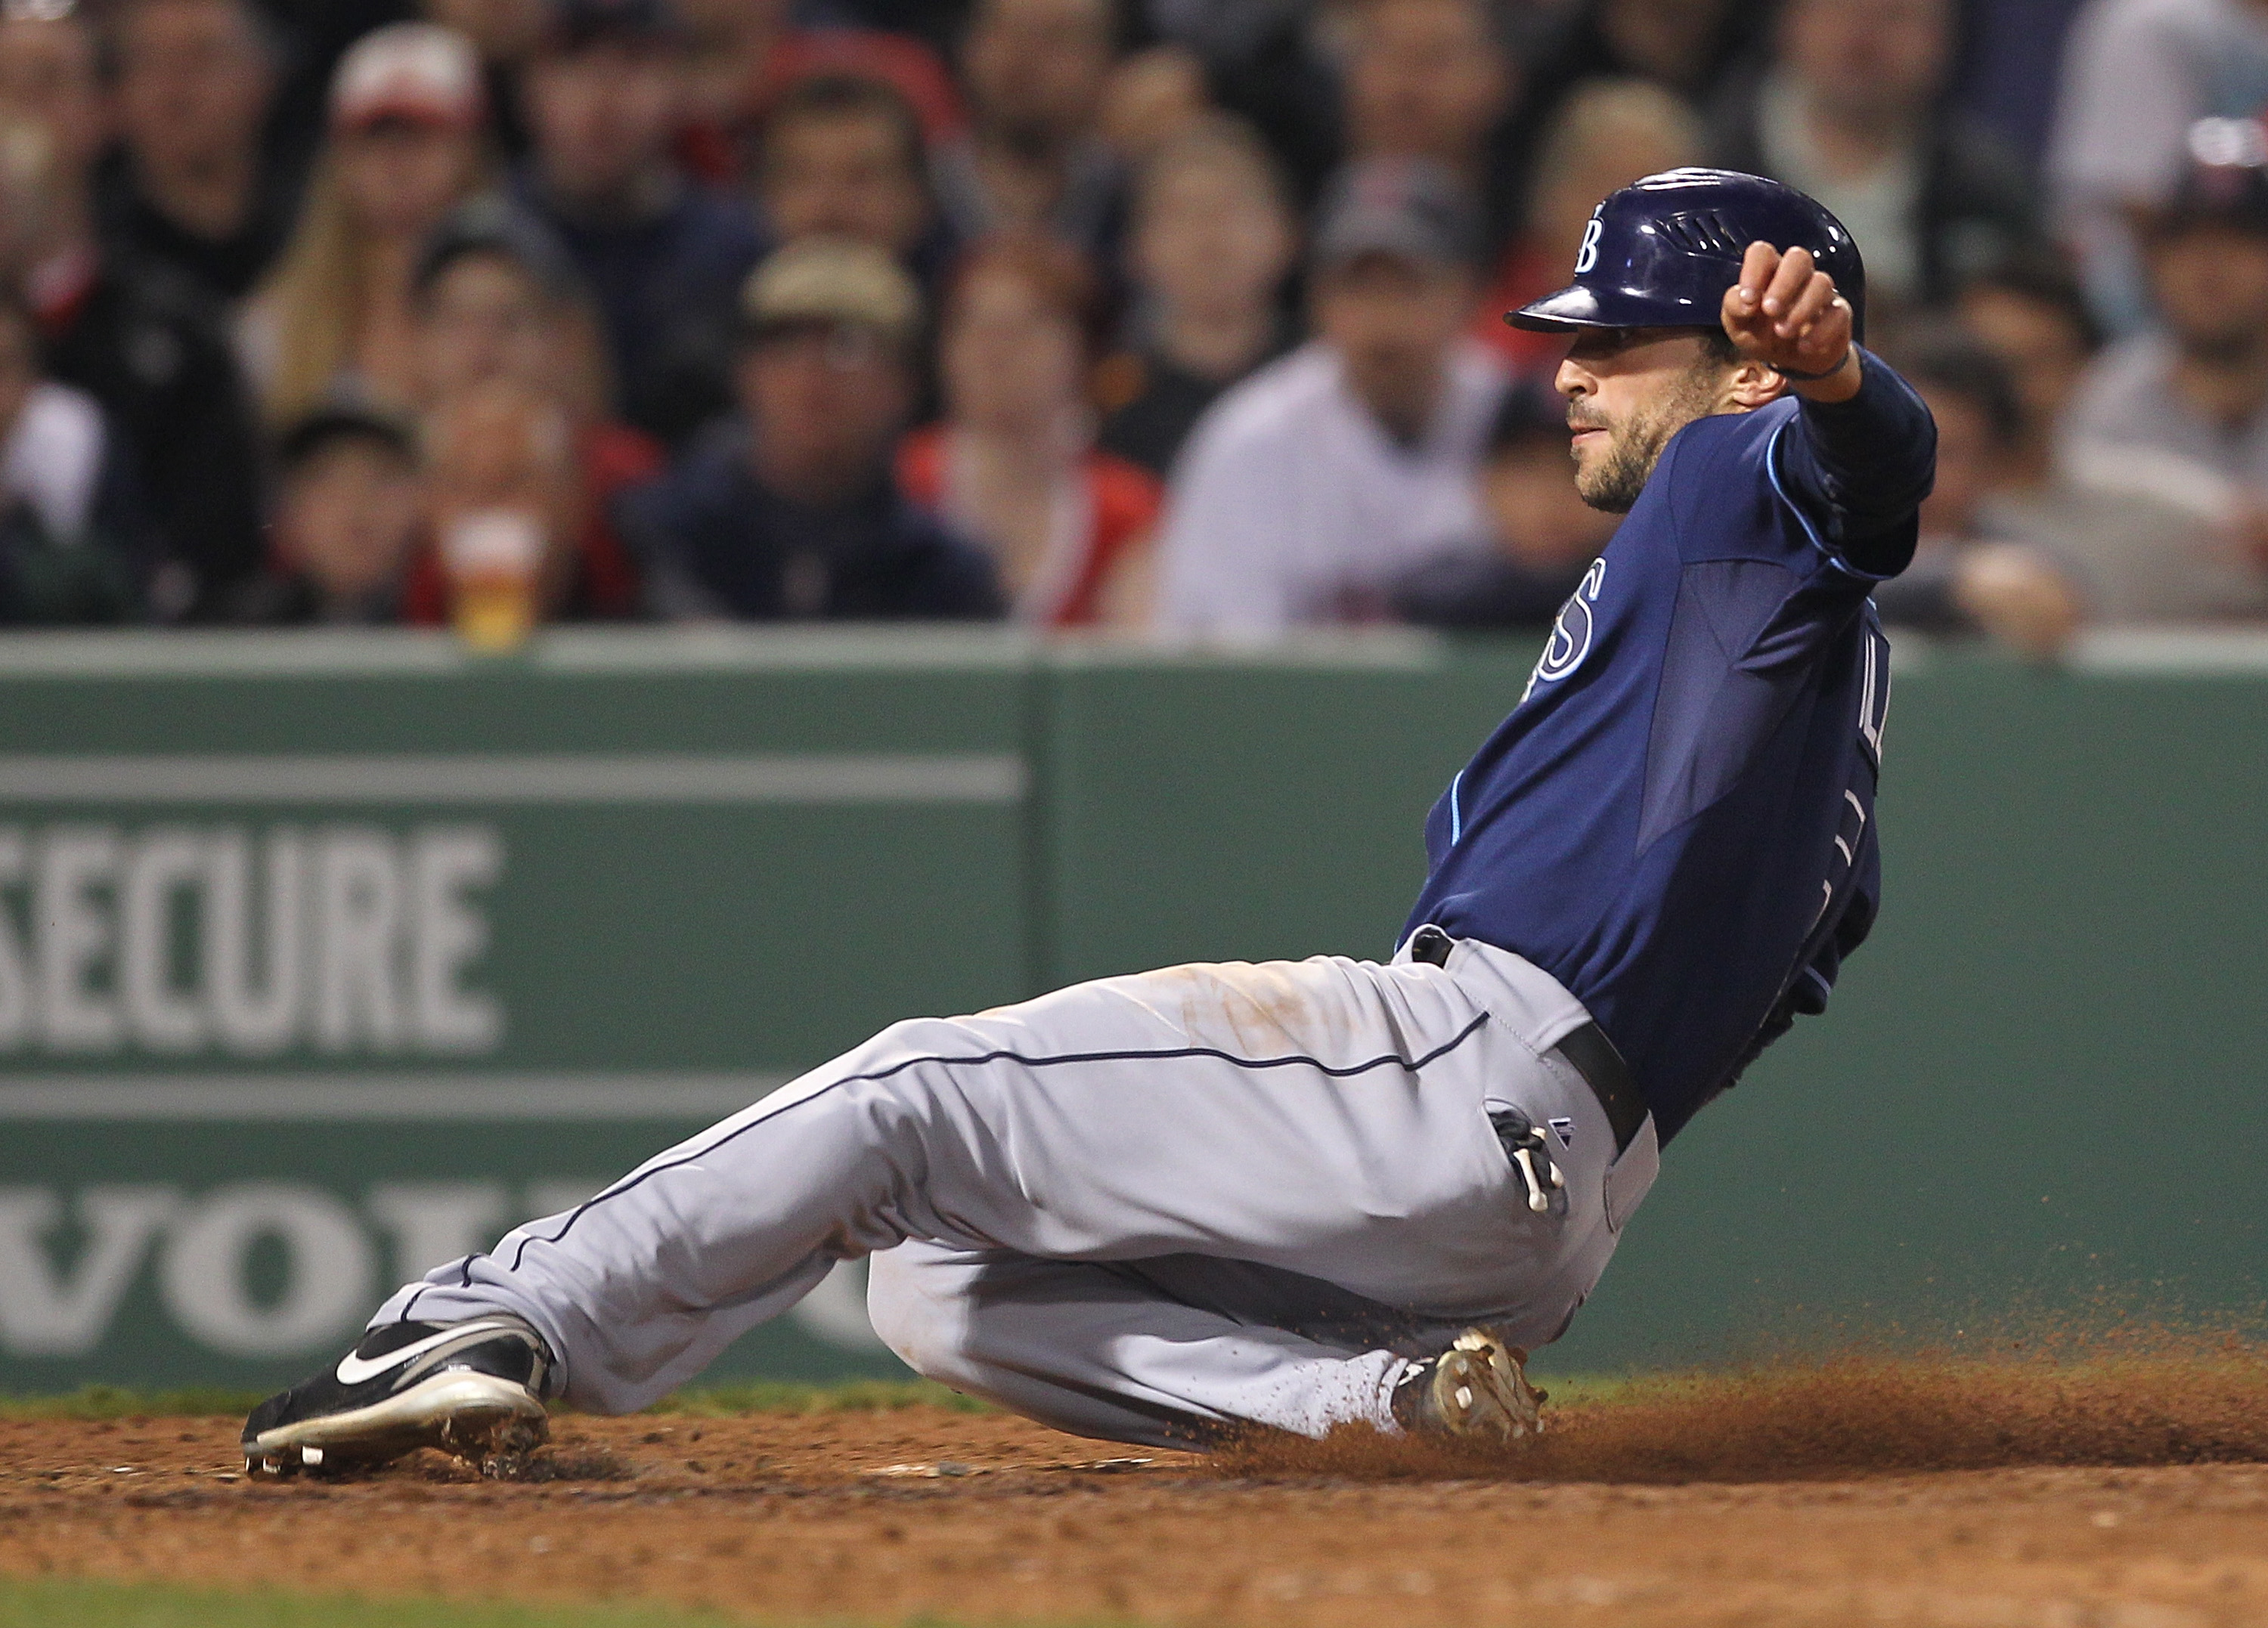 BOSTON, MA - APRIL 11:  Sam Fuld #5 of the Tampa Bay Rays scores on a wild pitch against the Boston Red Sox at Fenway Park April 11, 2011 in Boston, Massachusetts. (Photo by Jim Rogash/Getty Images)